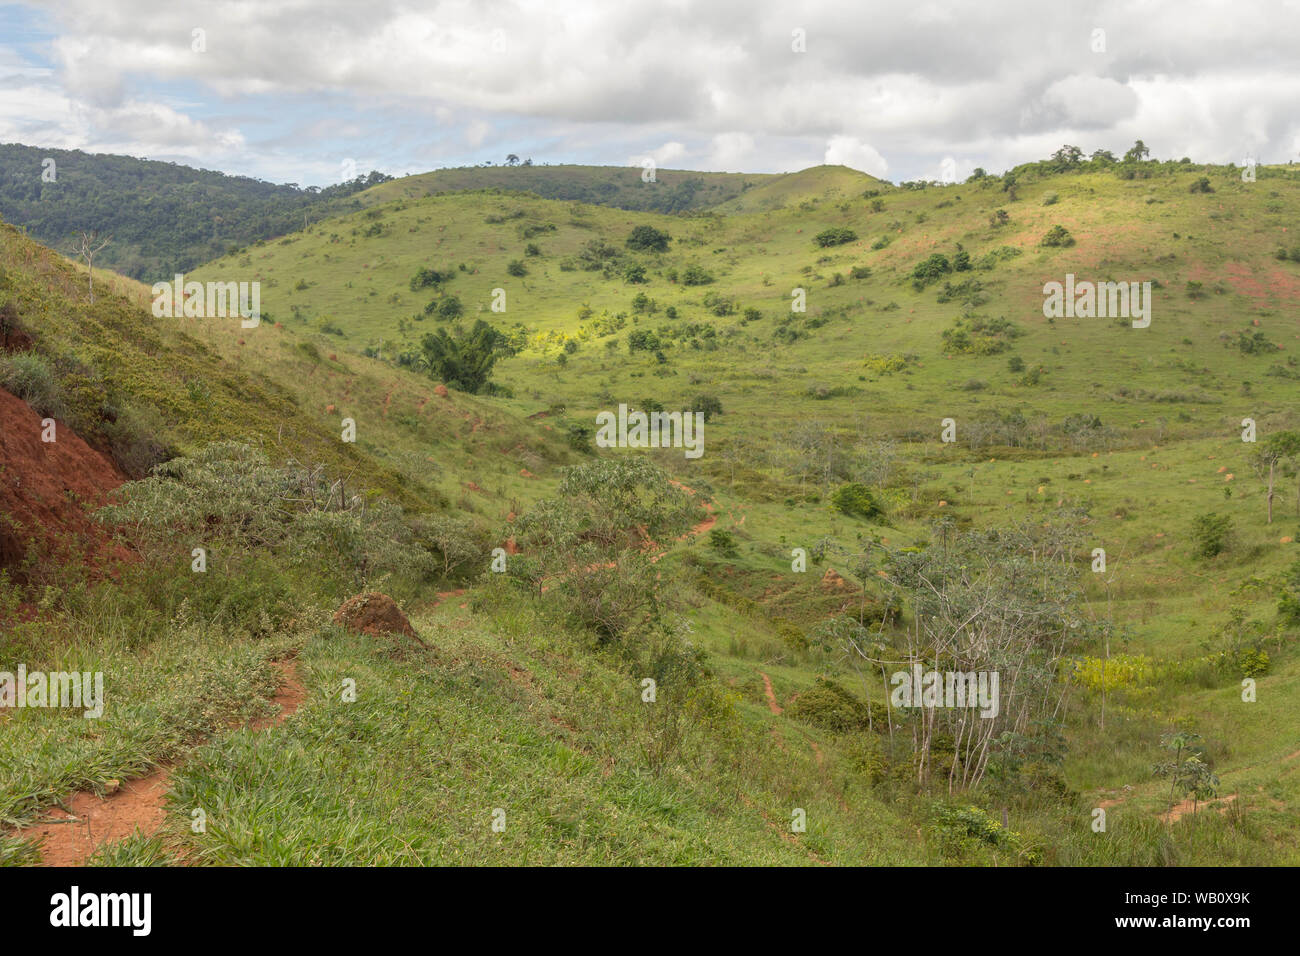 landscape of a farm at Minas Gerais state, Brazil. The soil does not seem cultivated. Stock Photo